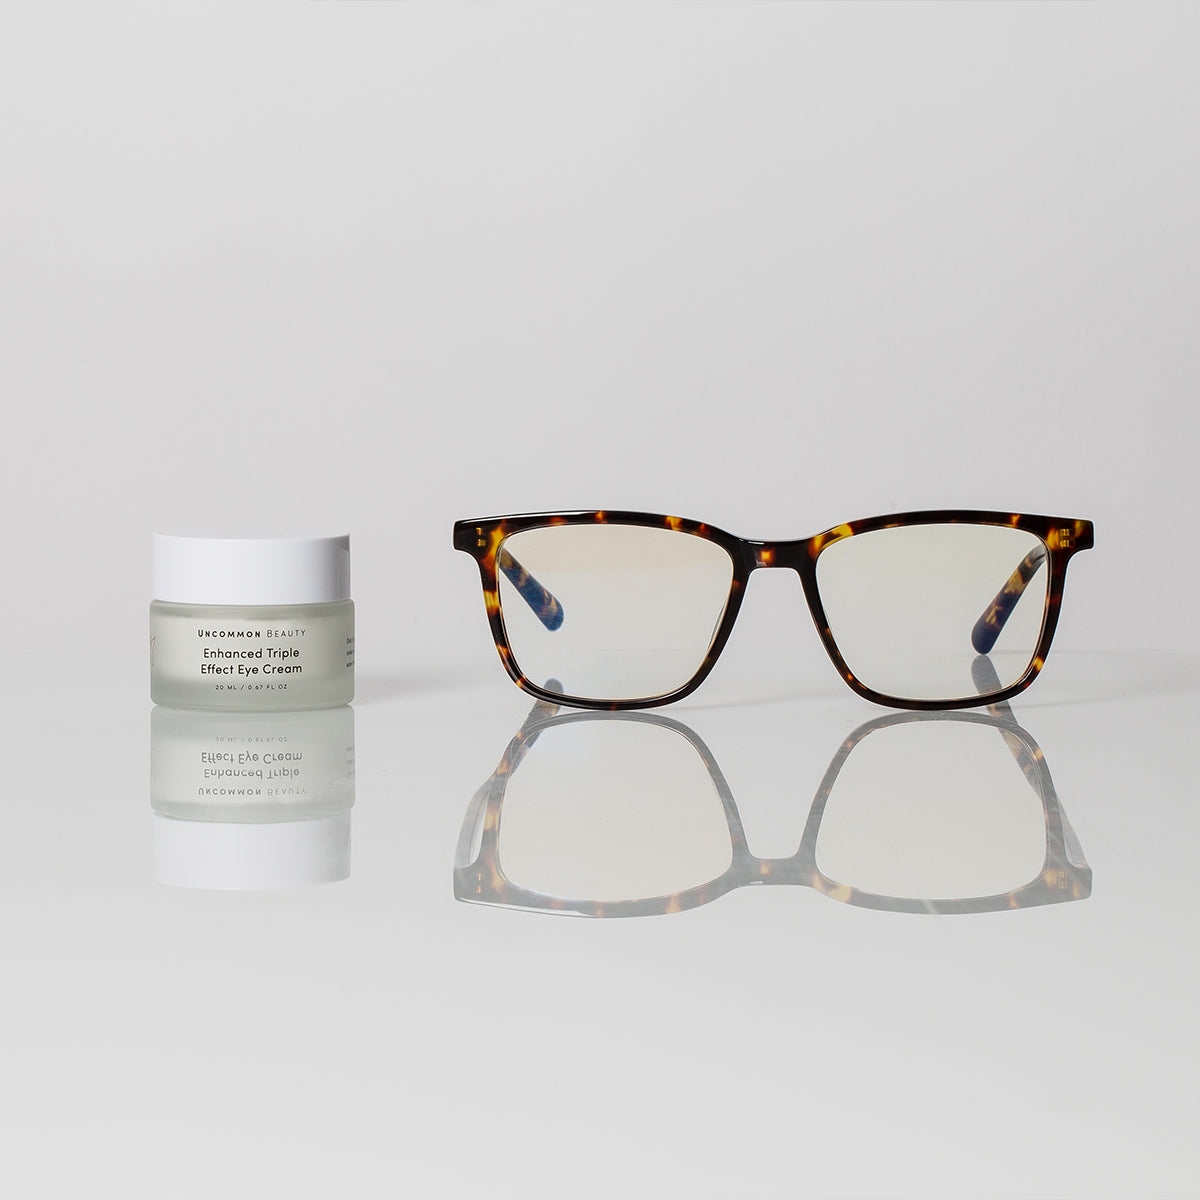 Brighten and Protect Duo-Tort Frame | Product Image | Uncommon Beauty